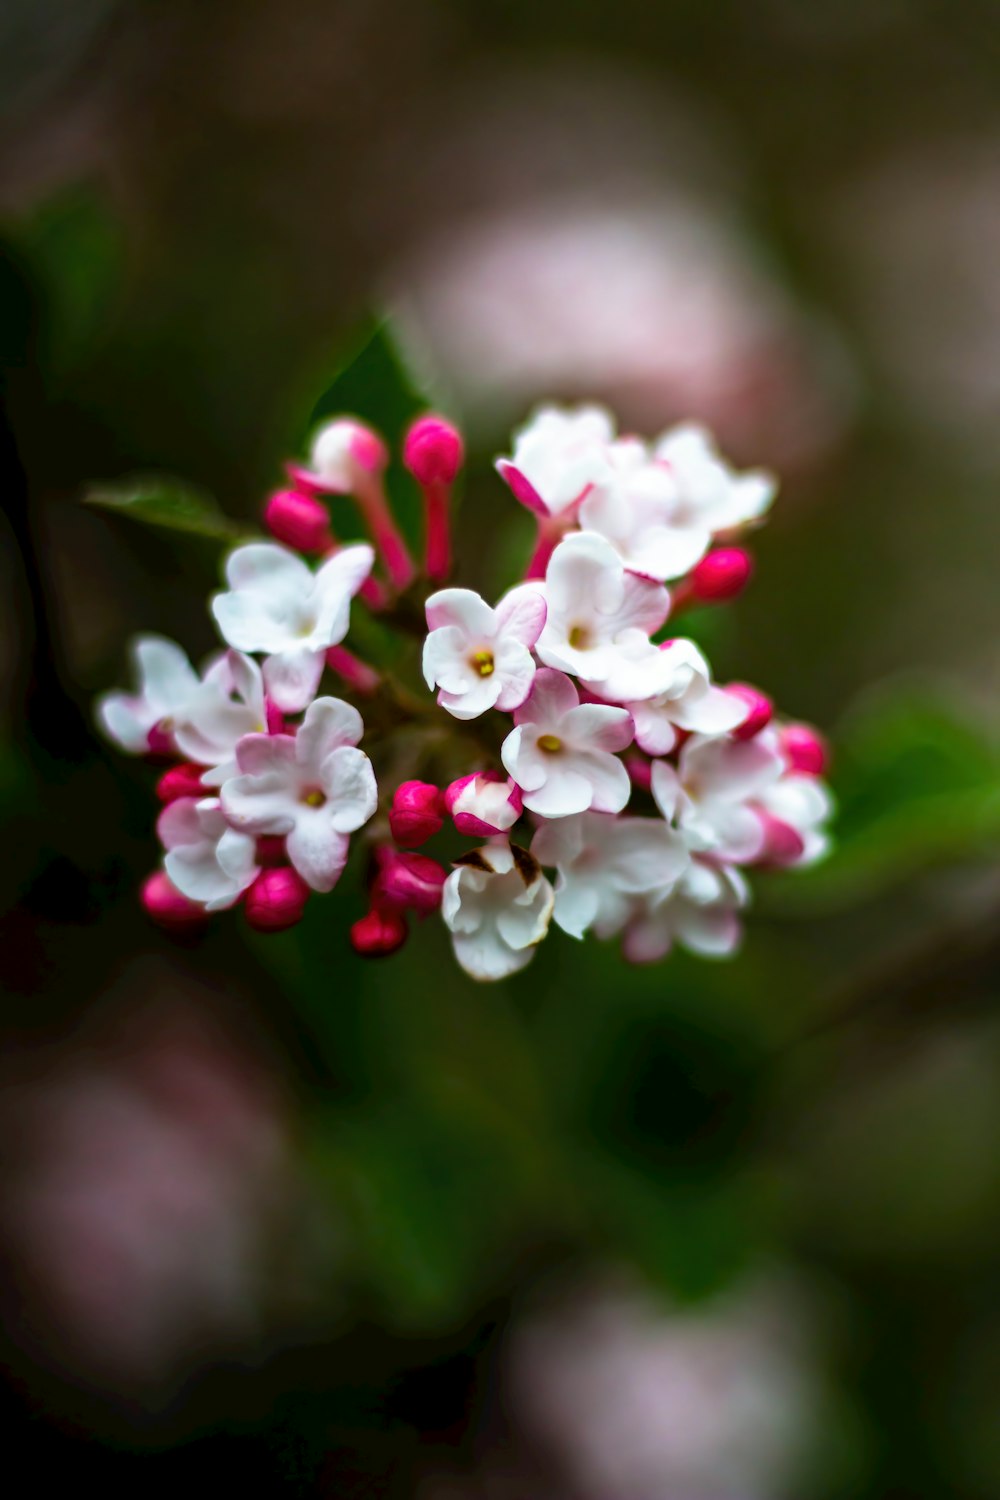 a bunch of white and pink flowers with green leaves